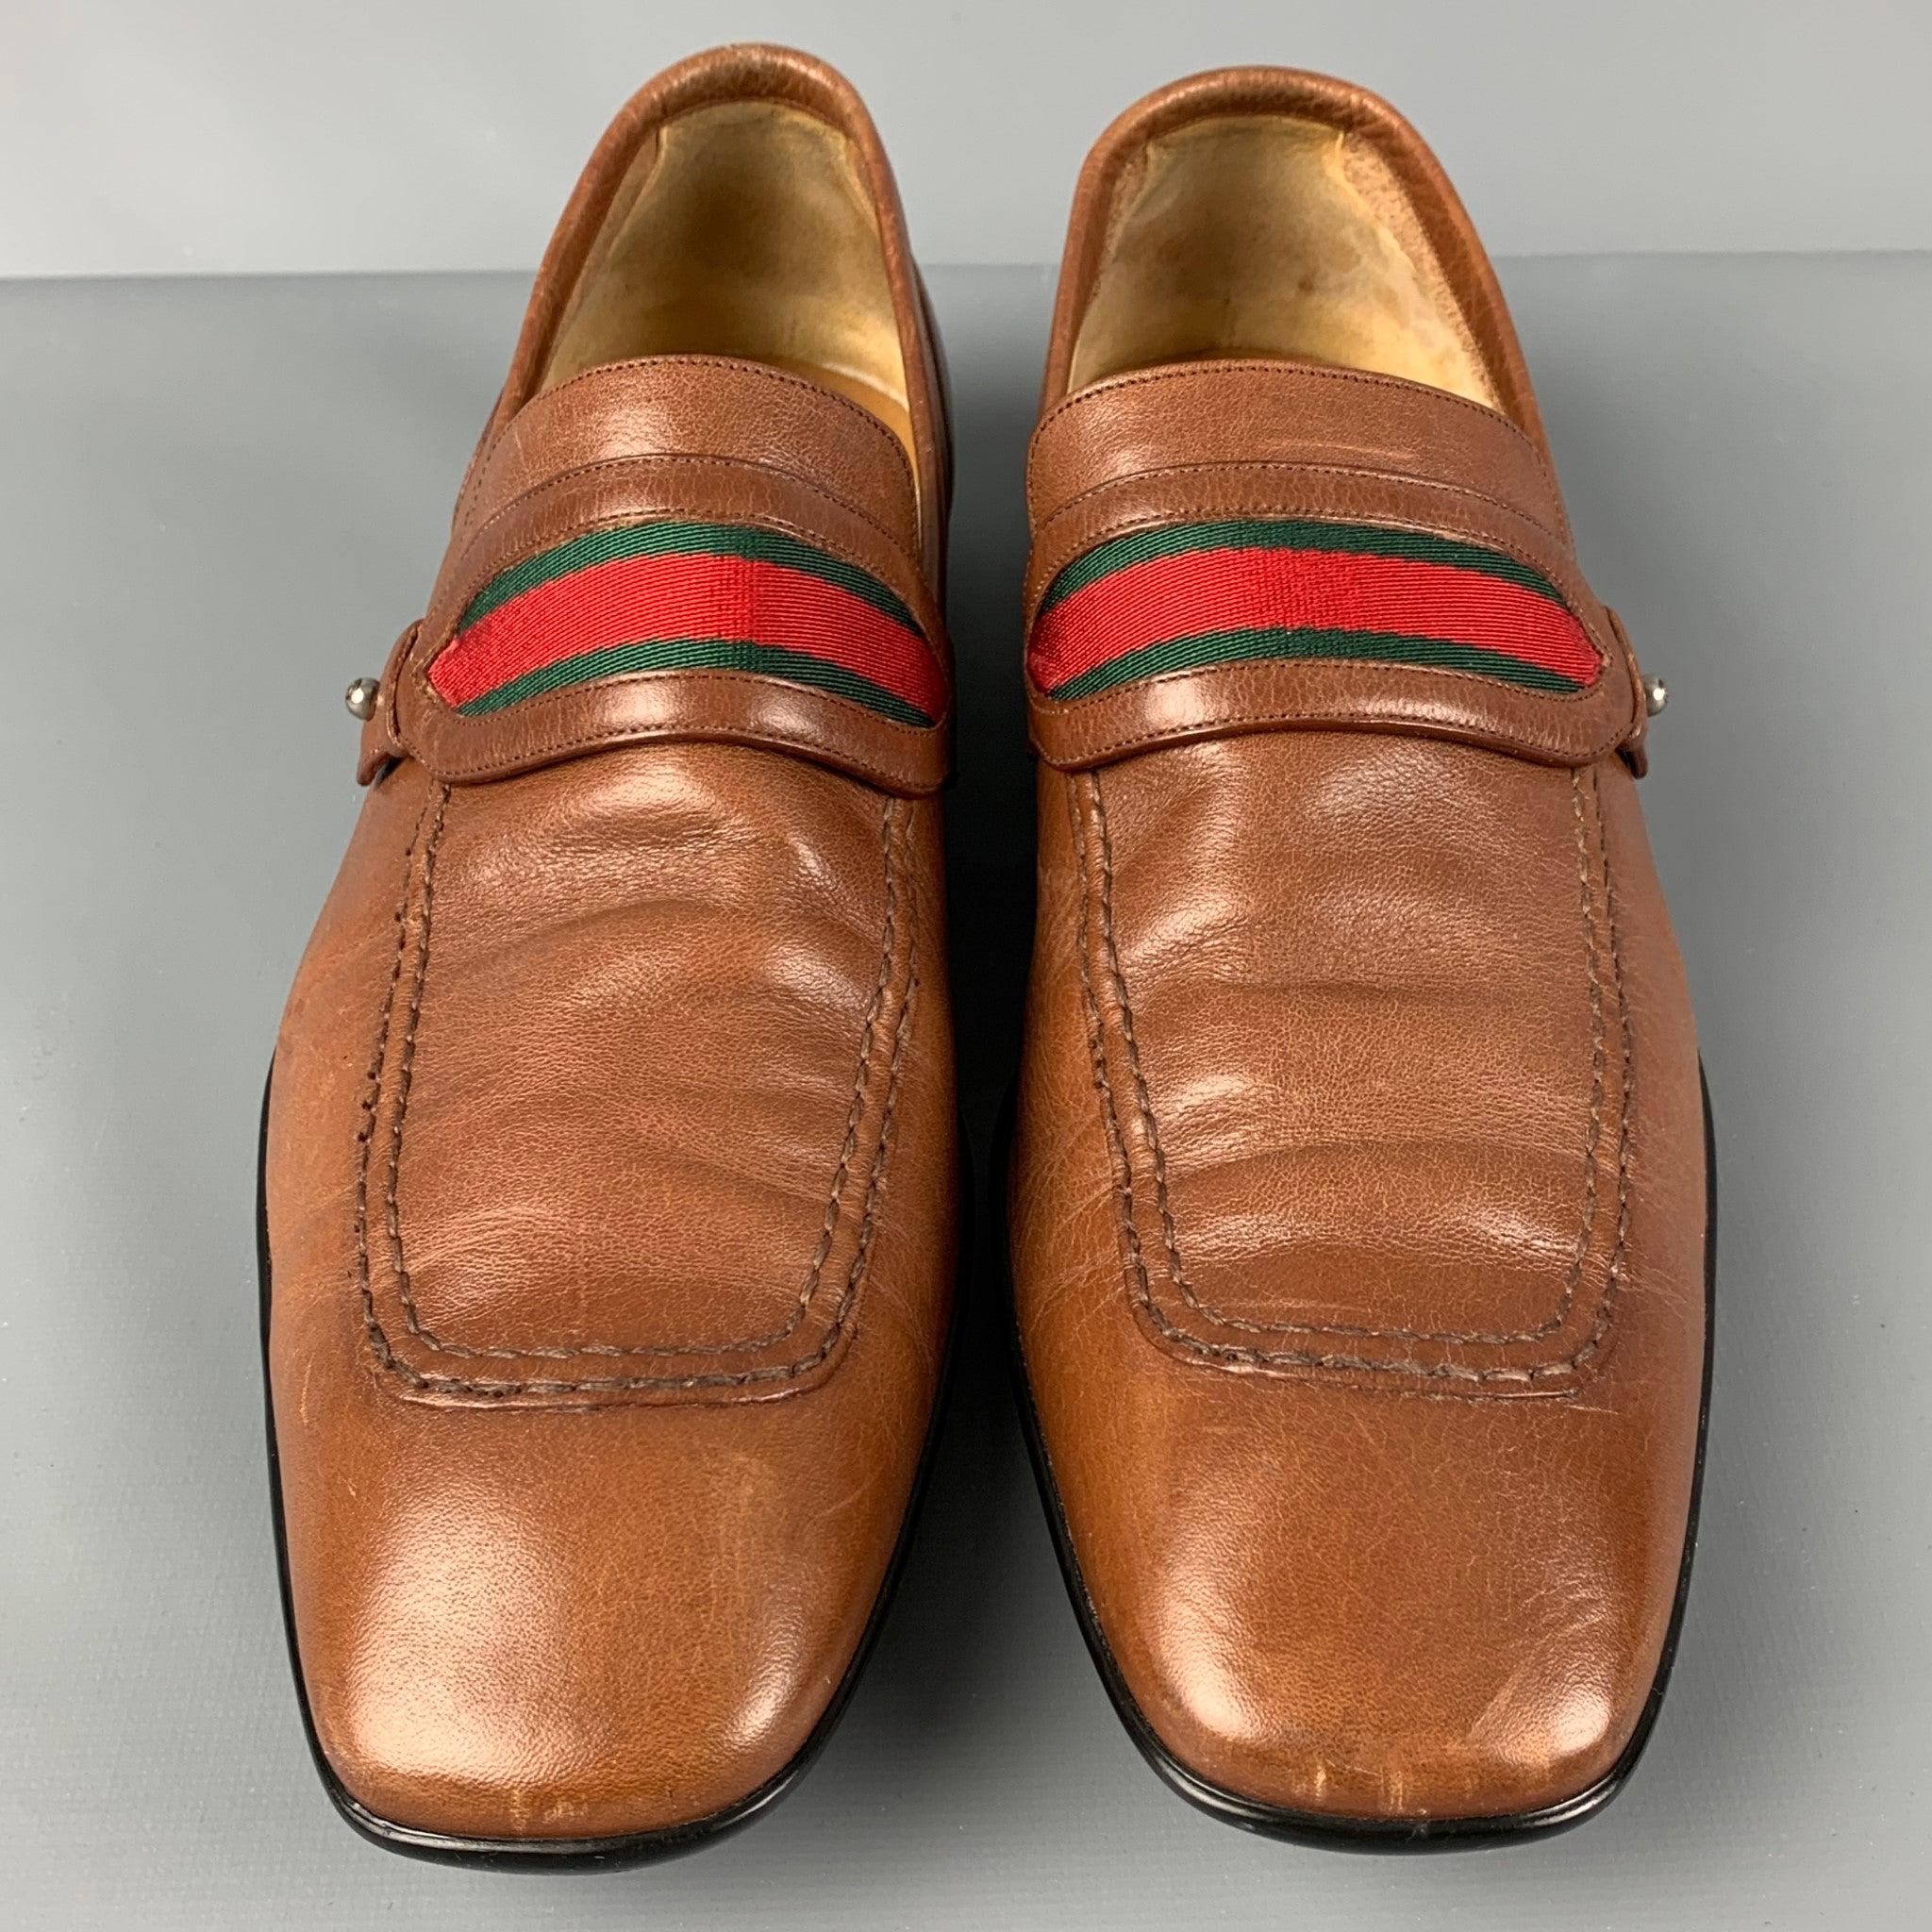 Men's Vintage GUCCI Size 7.5 Tan Green Red Slip On Loafers For Sale